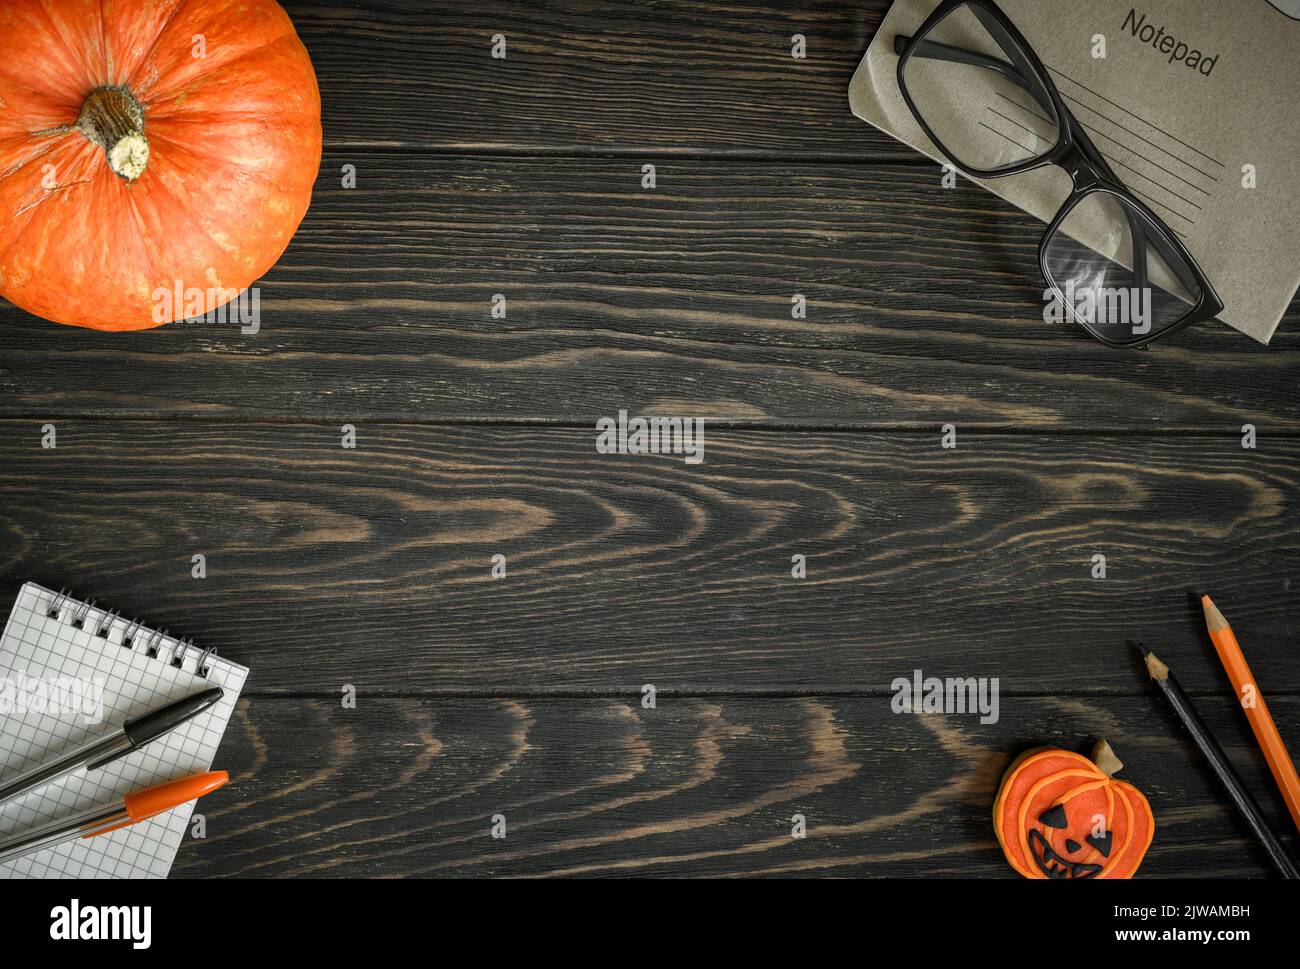 Halloween background, top view. Pumpkin and school supplies on dark wooden table, flat lay. Frame of Halloween orange food, glasses and notepad on woo Stock Photo